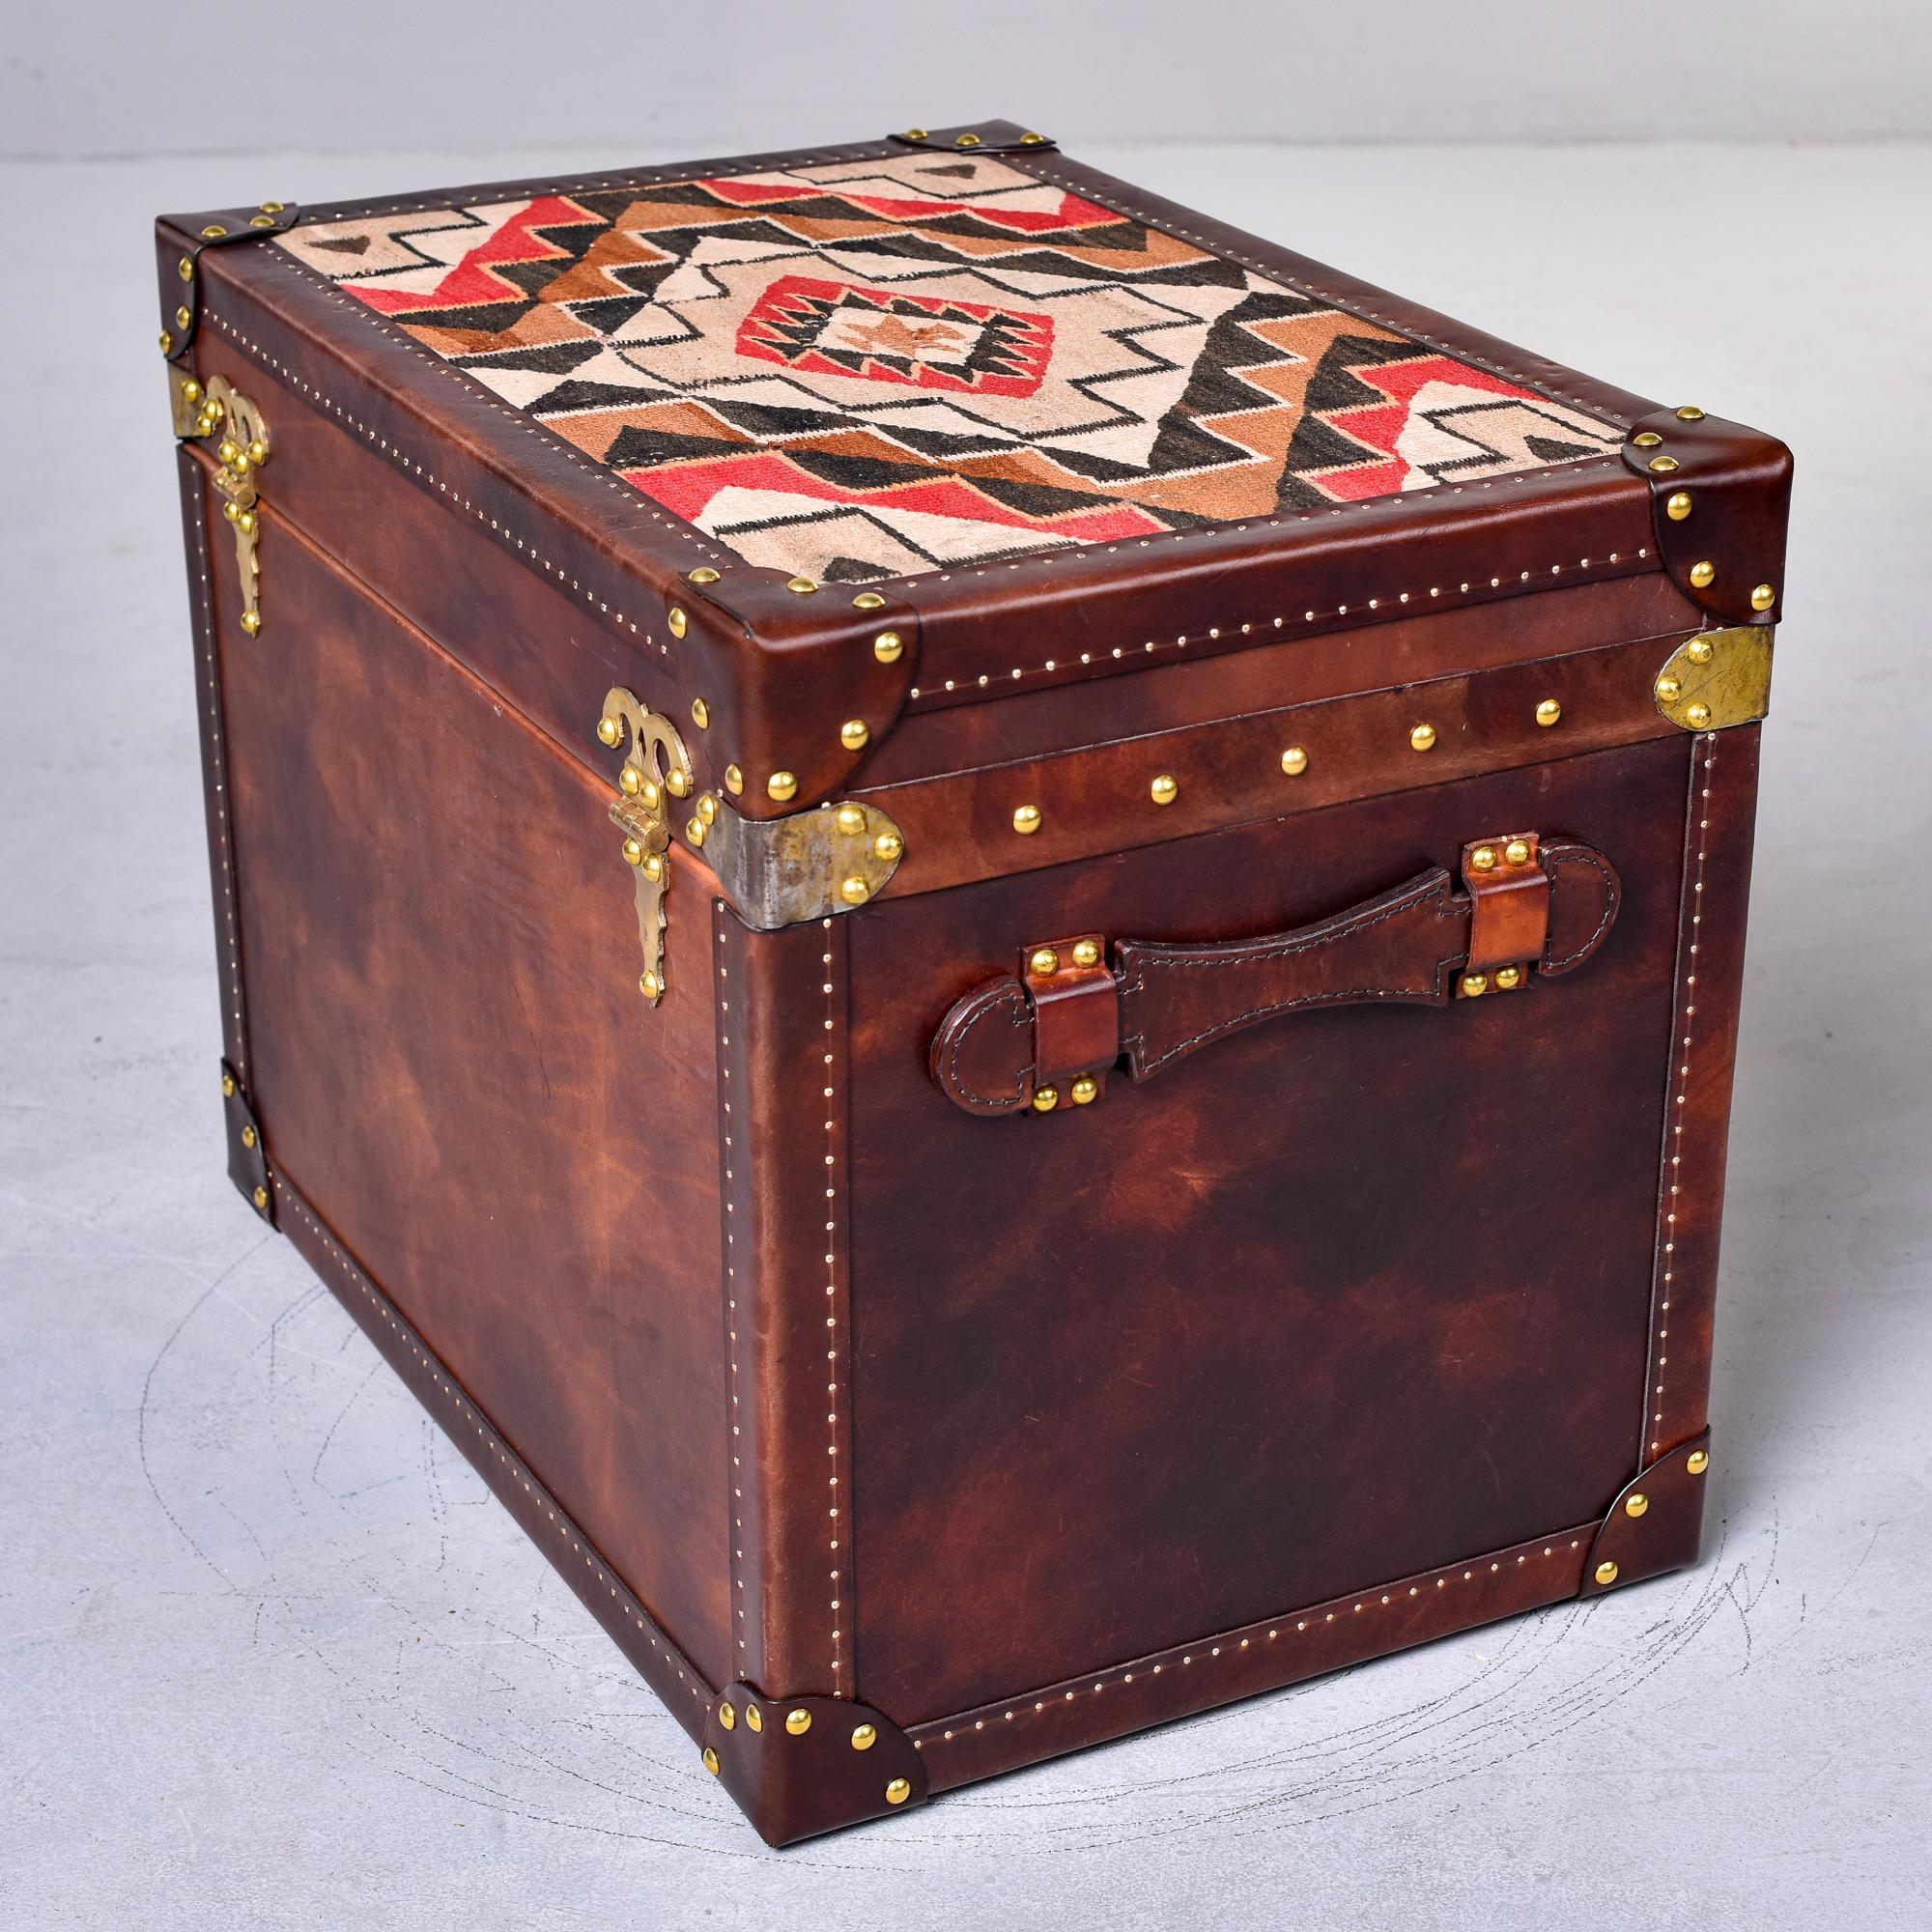 American Leather Covered Trunk with Vintage Hardware and Kilim on Top Panel For Sale